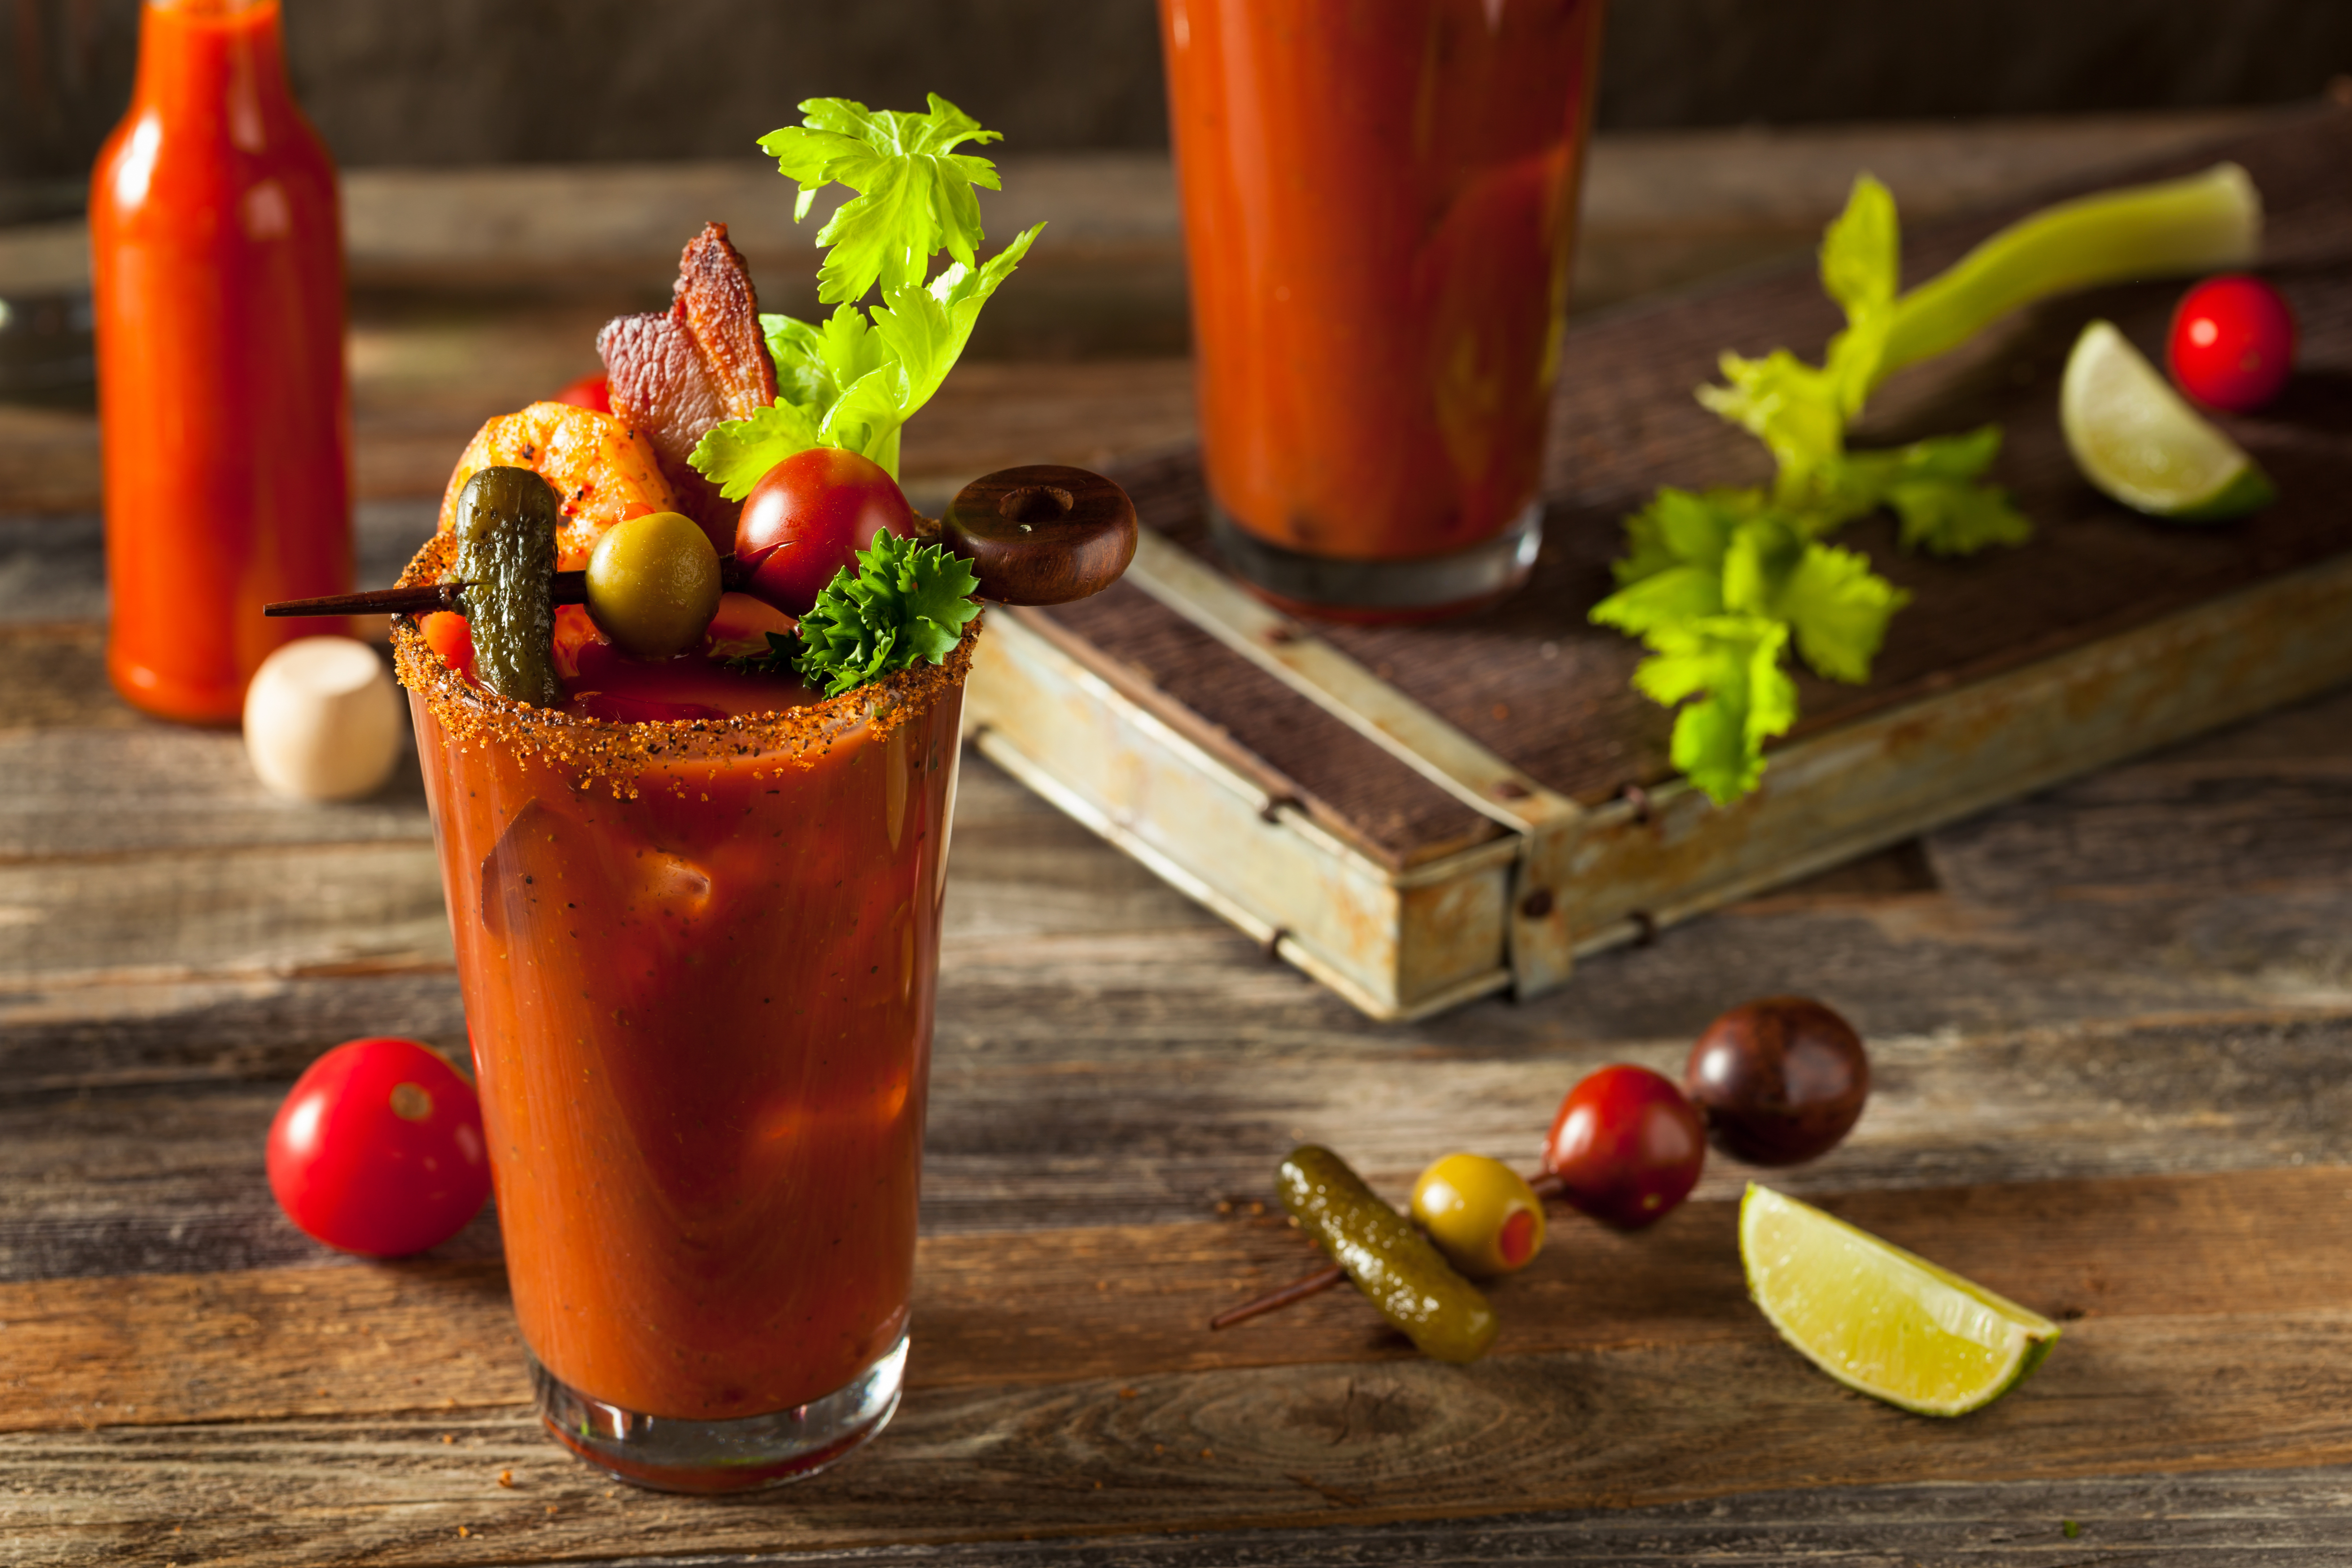 A glass of bloody mary with celery and other garnishes on a wooden table, with ingredients scattered around.